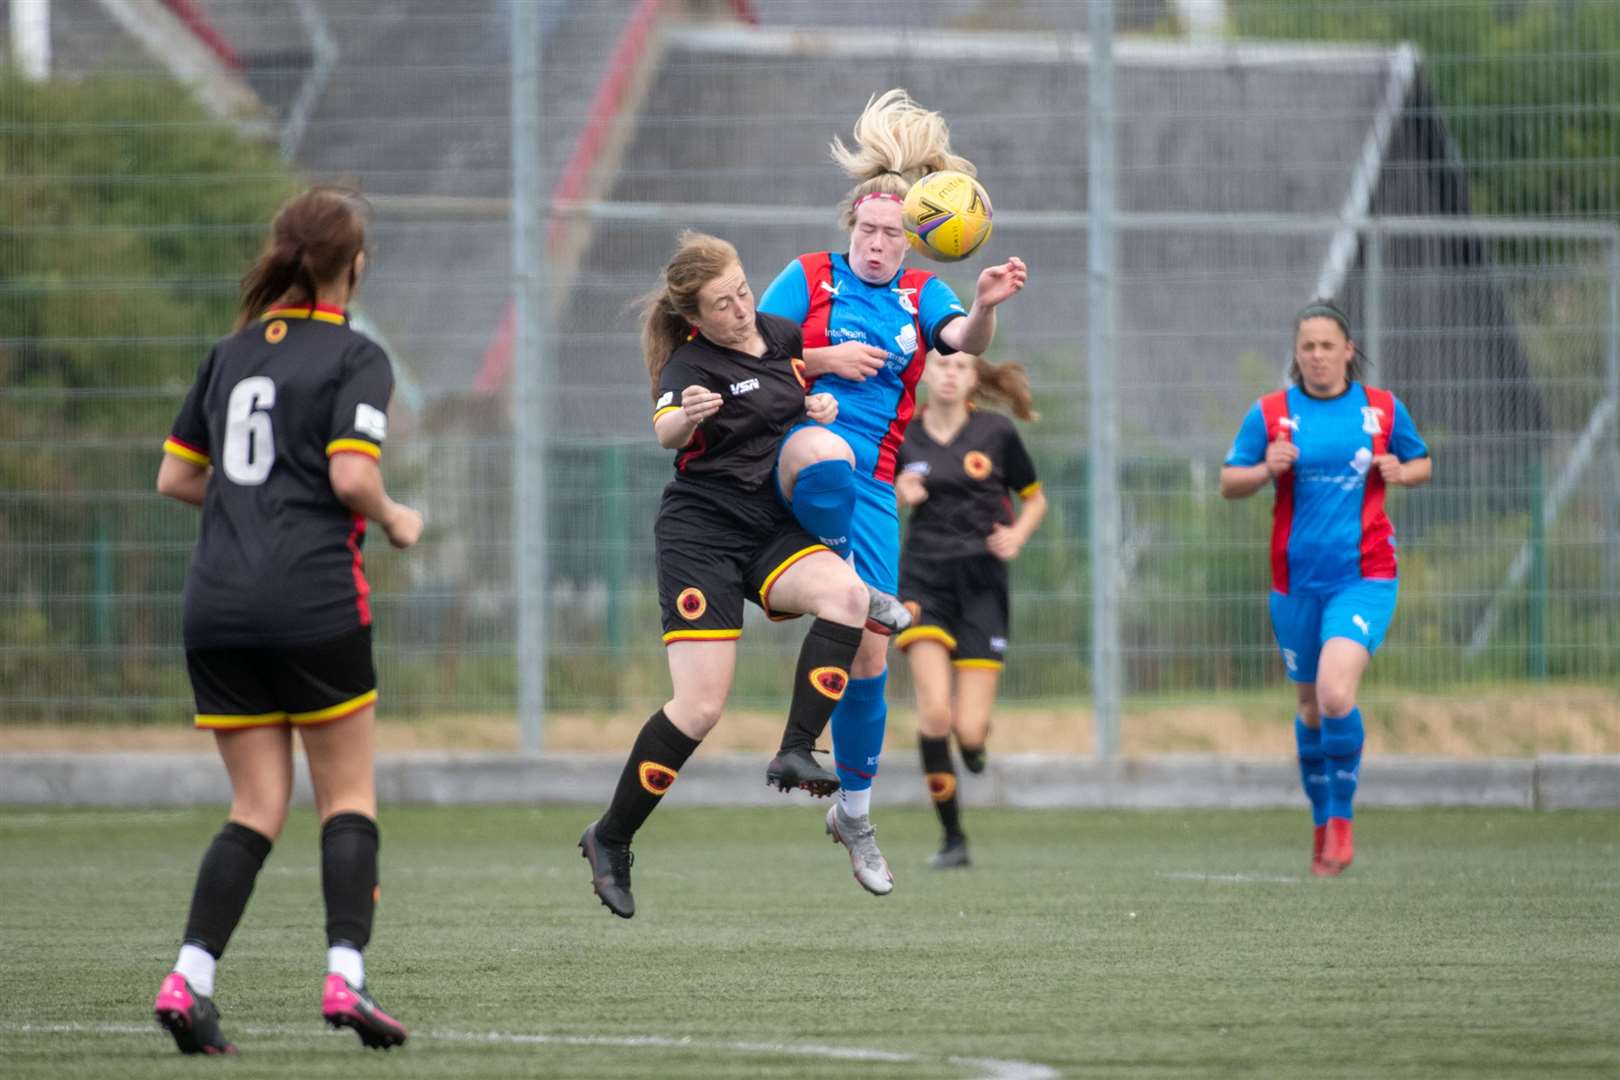 Caley Thistle Women are part of the Championship – which this season became the top division under SWF's governance. Picture: Callum Mackay